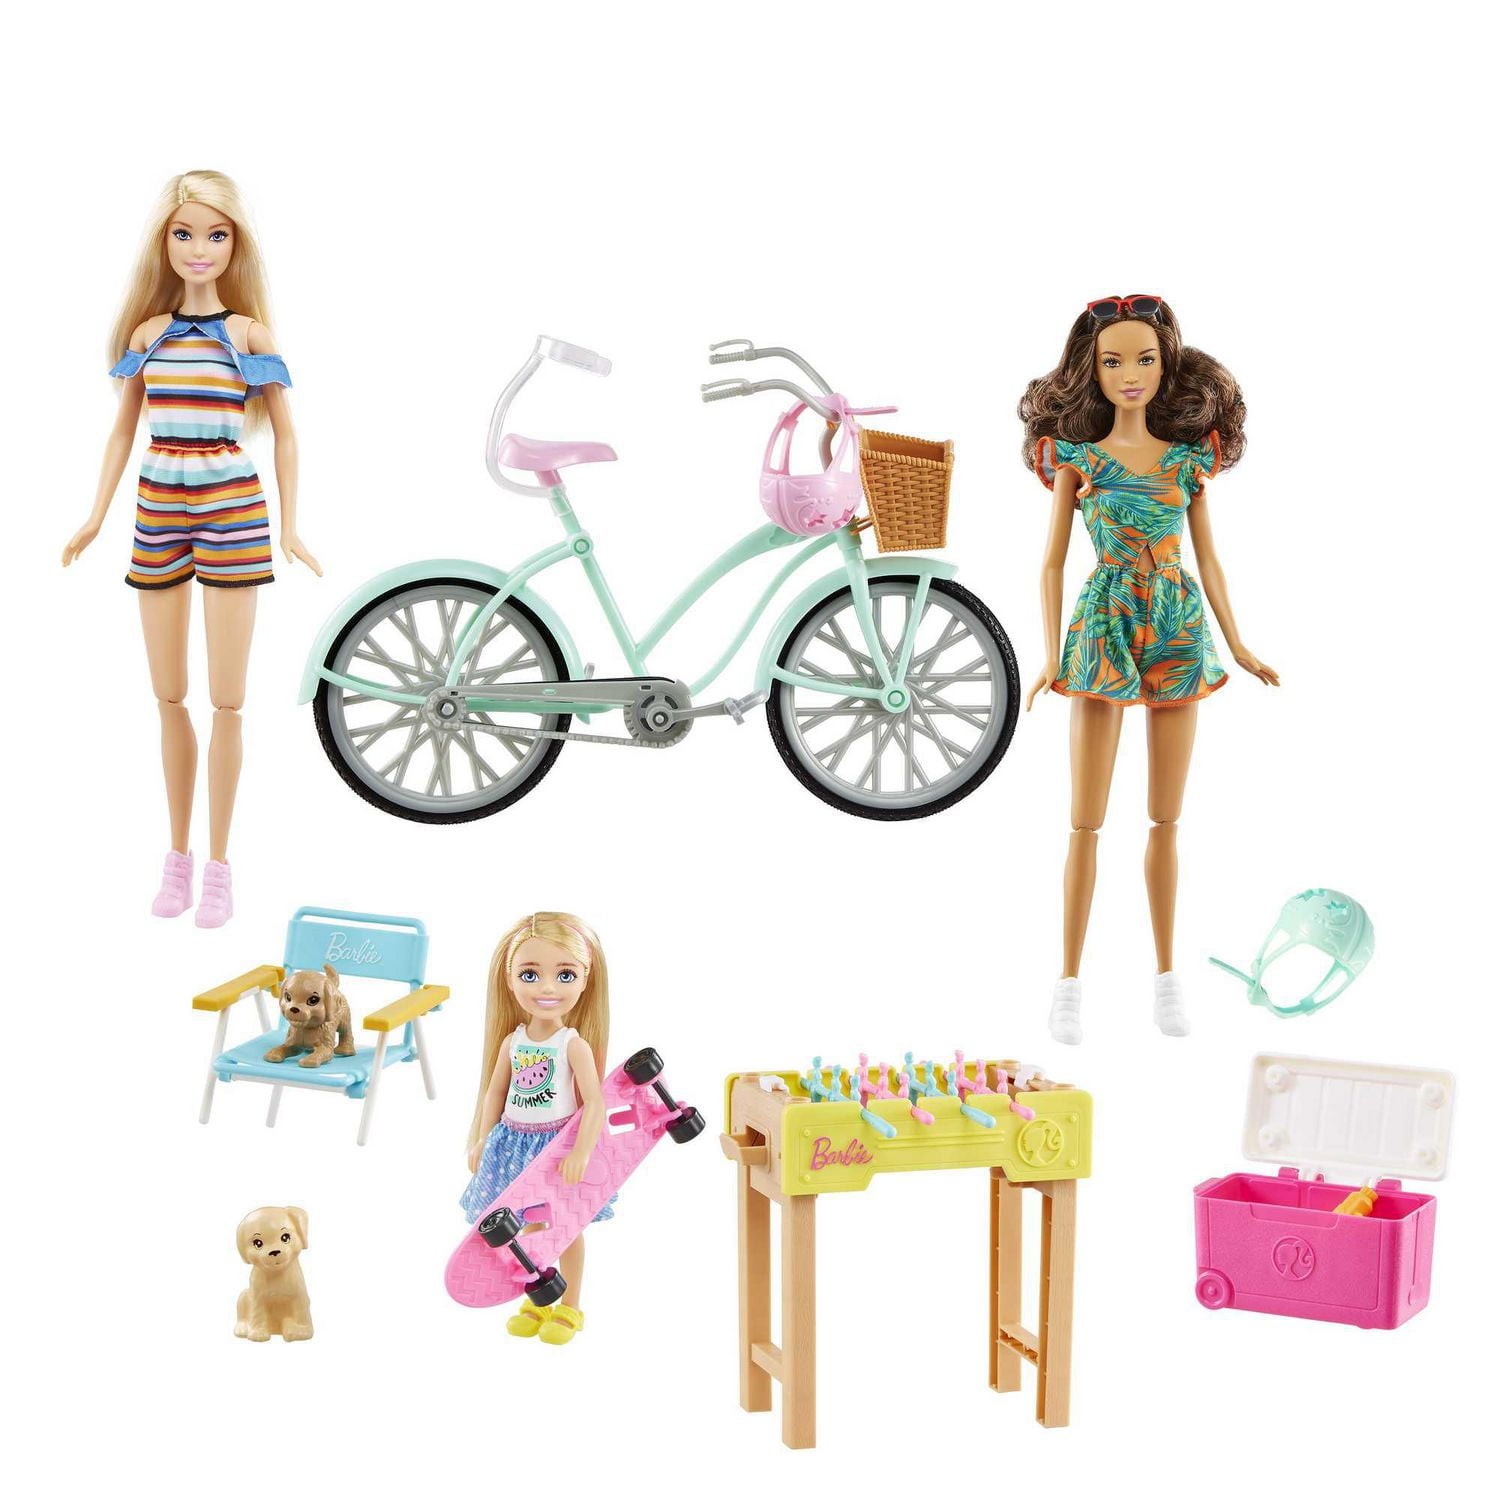 Barbie Backyard Fun Gift Set with 2 Barbie Dolls, Chelsea Doll, Pet  Puppies, Bicycle, Skateboard, Game Table & Accessories